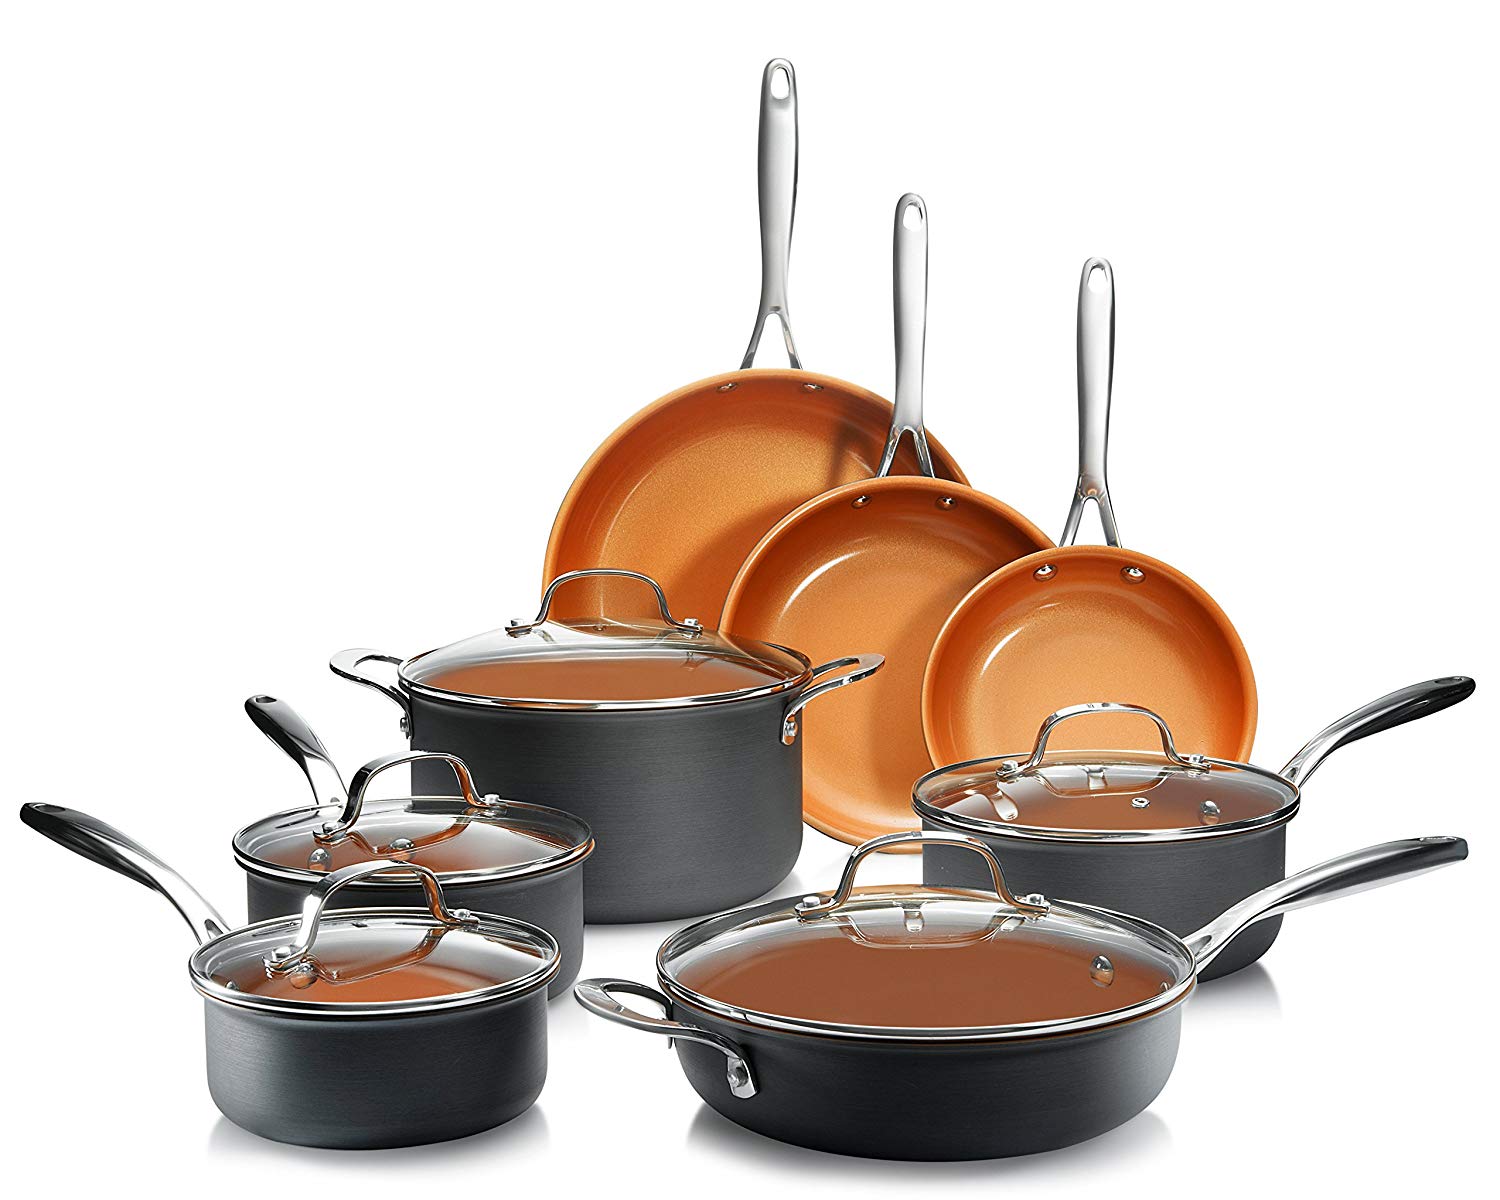 MICHELANGELO Copper Cookware Set 5 Piece, Ultra Nonstick Pots and Pans  Copper with Ceramic Interior, Copper Nonstick Cookware Set, Ceramic Pot and